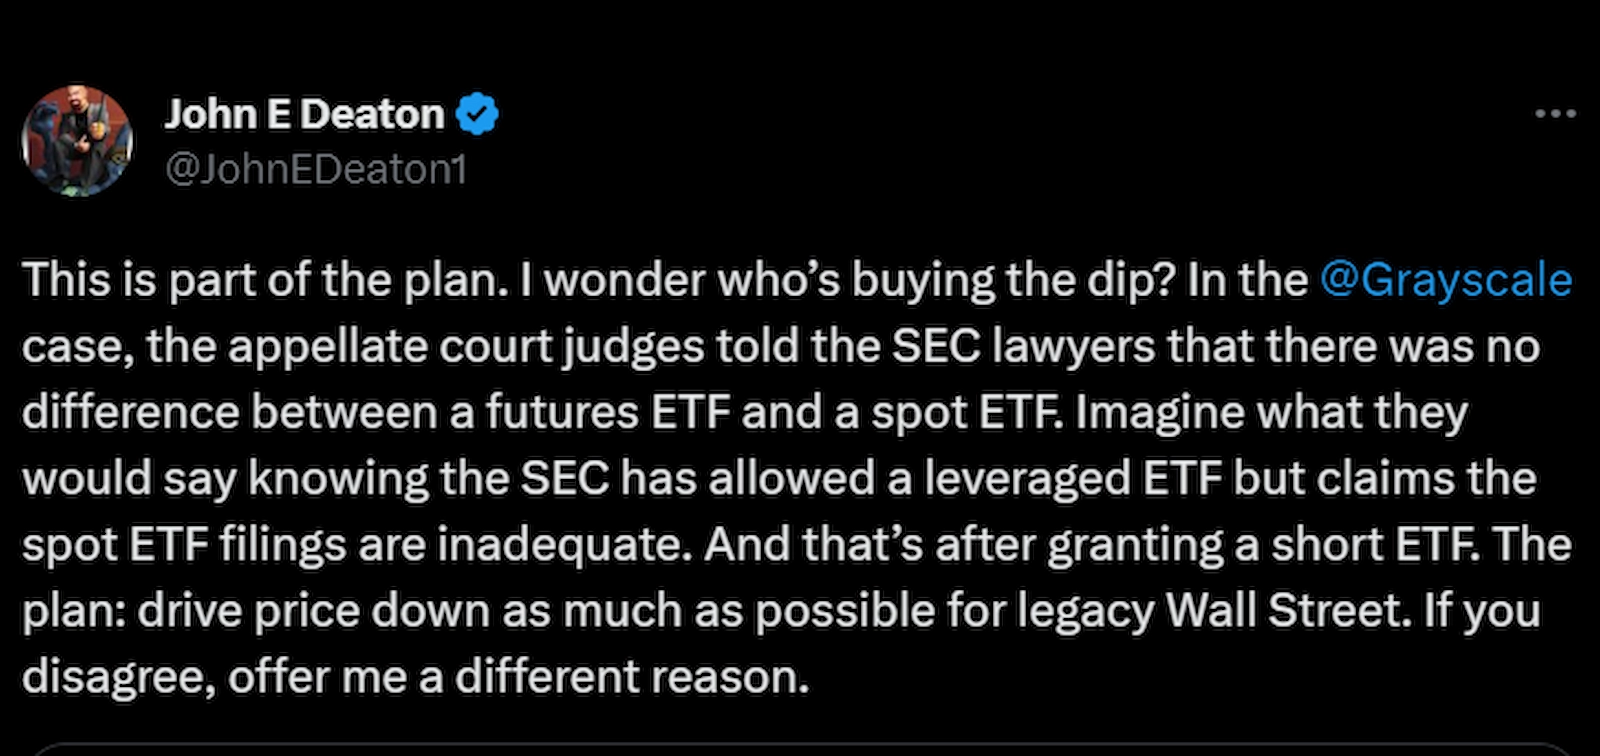 Crypto lawyer John Deaton stated the SEC declined the ETF applications to drive down BTC price